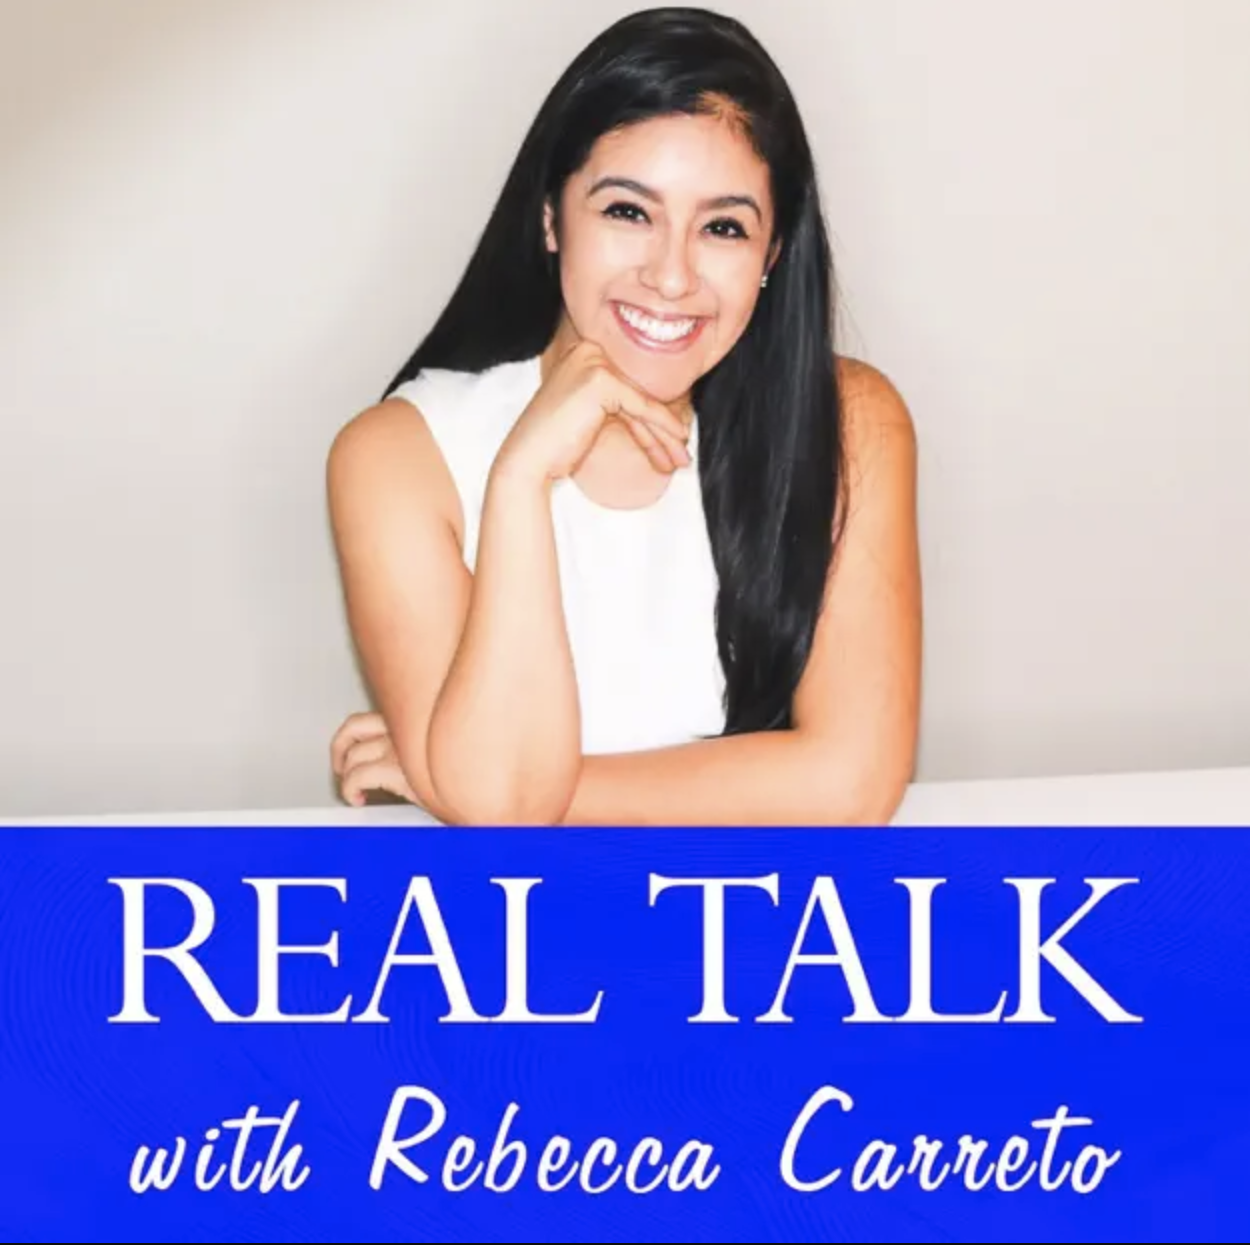 Real Talk with Rebecca Carreto.png